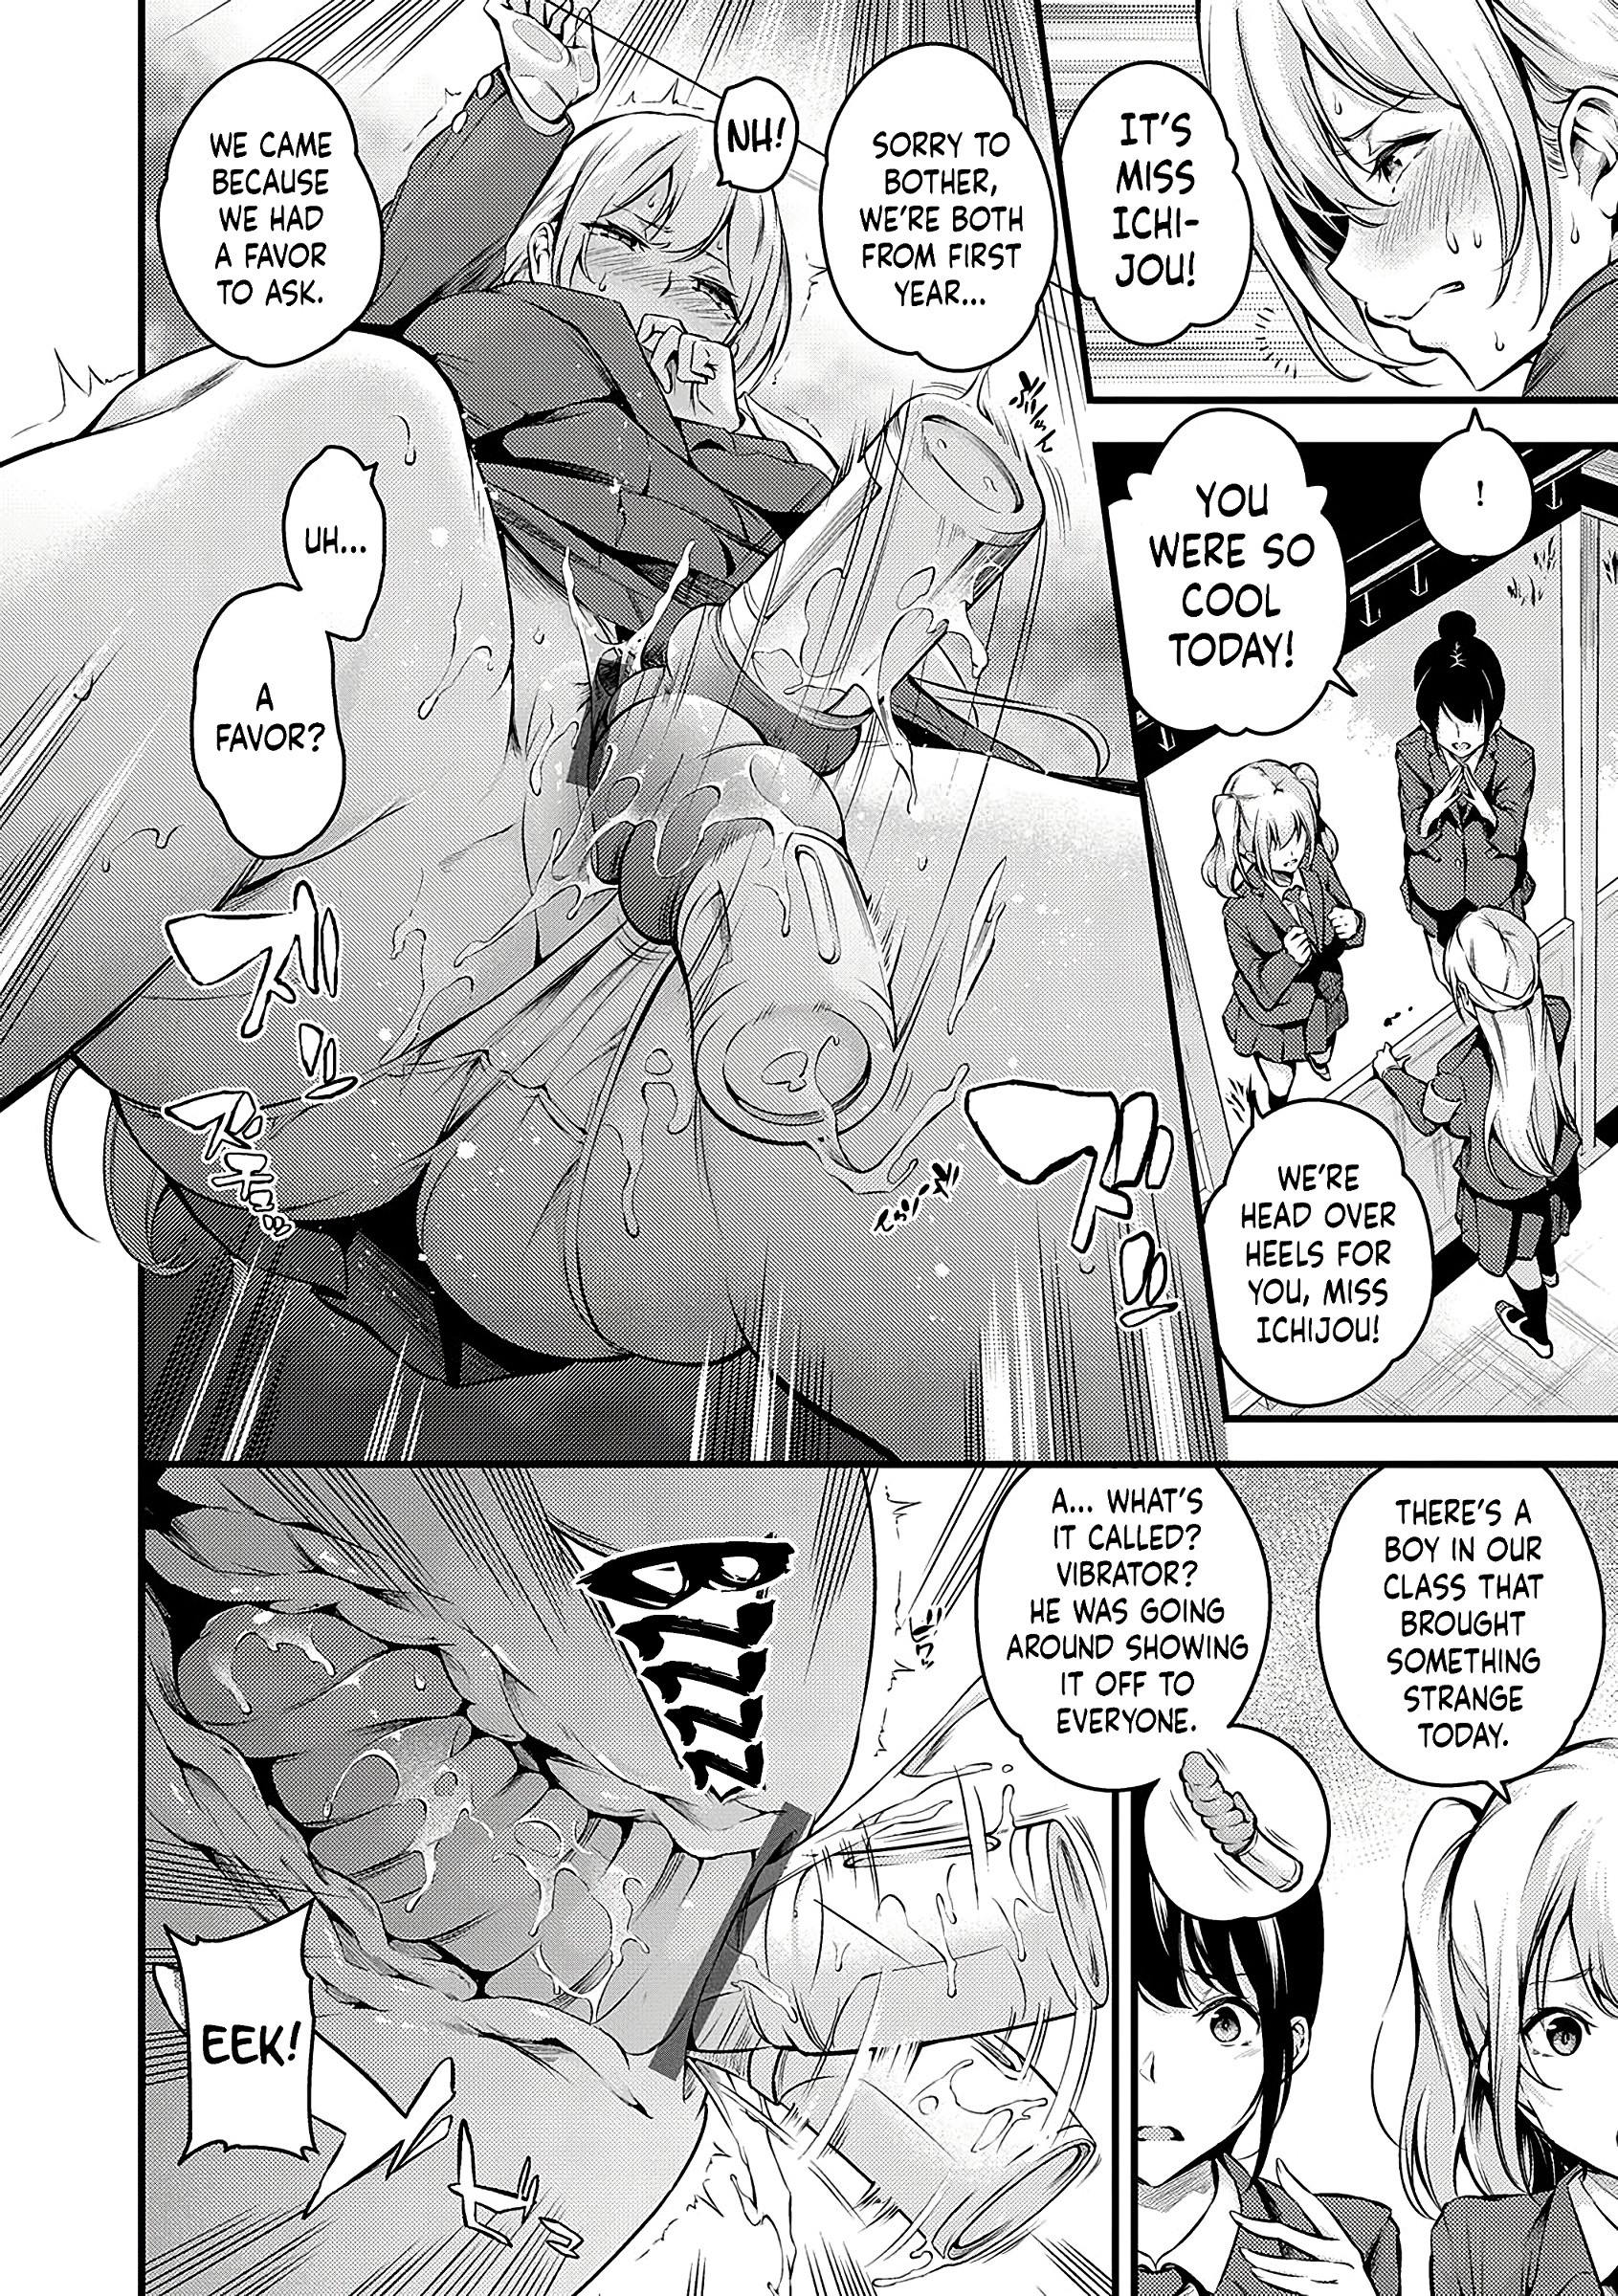 The Defeat of Ichijou From the Disciplinary Committee hentai manga picture 6